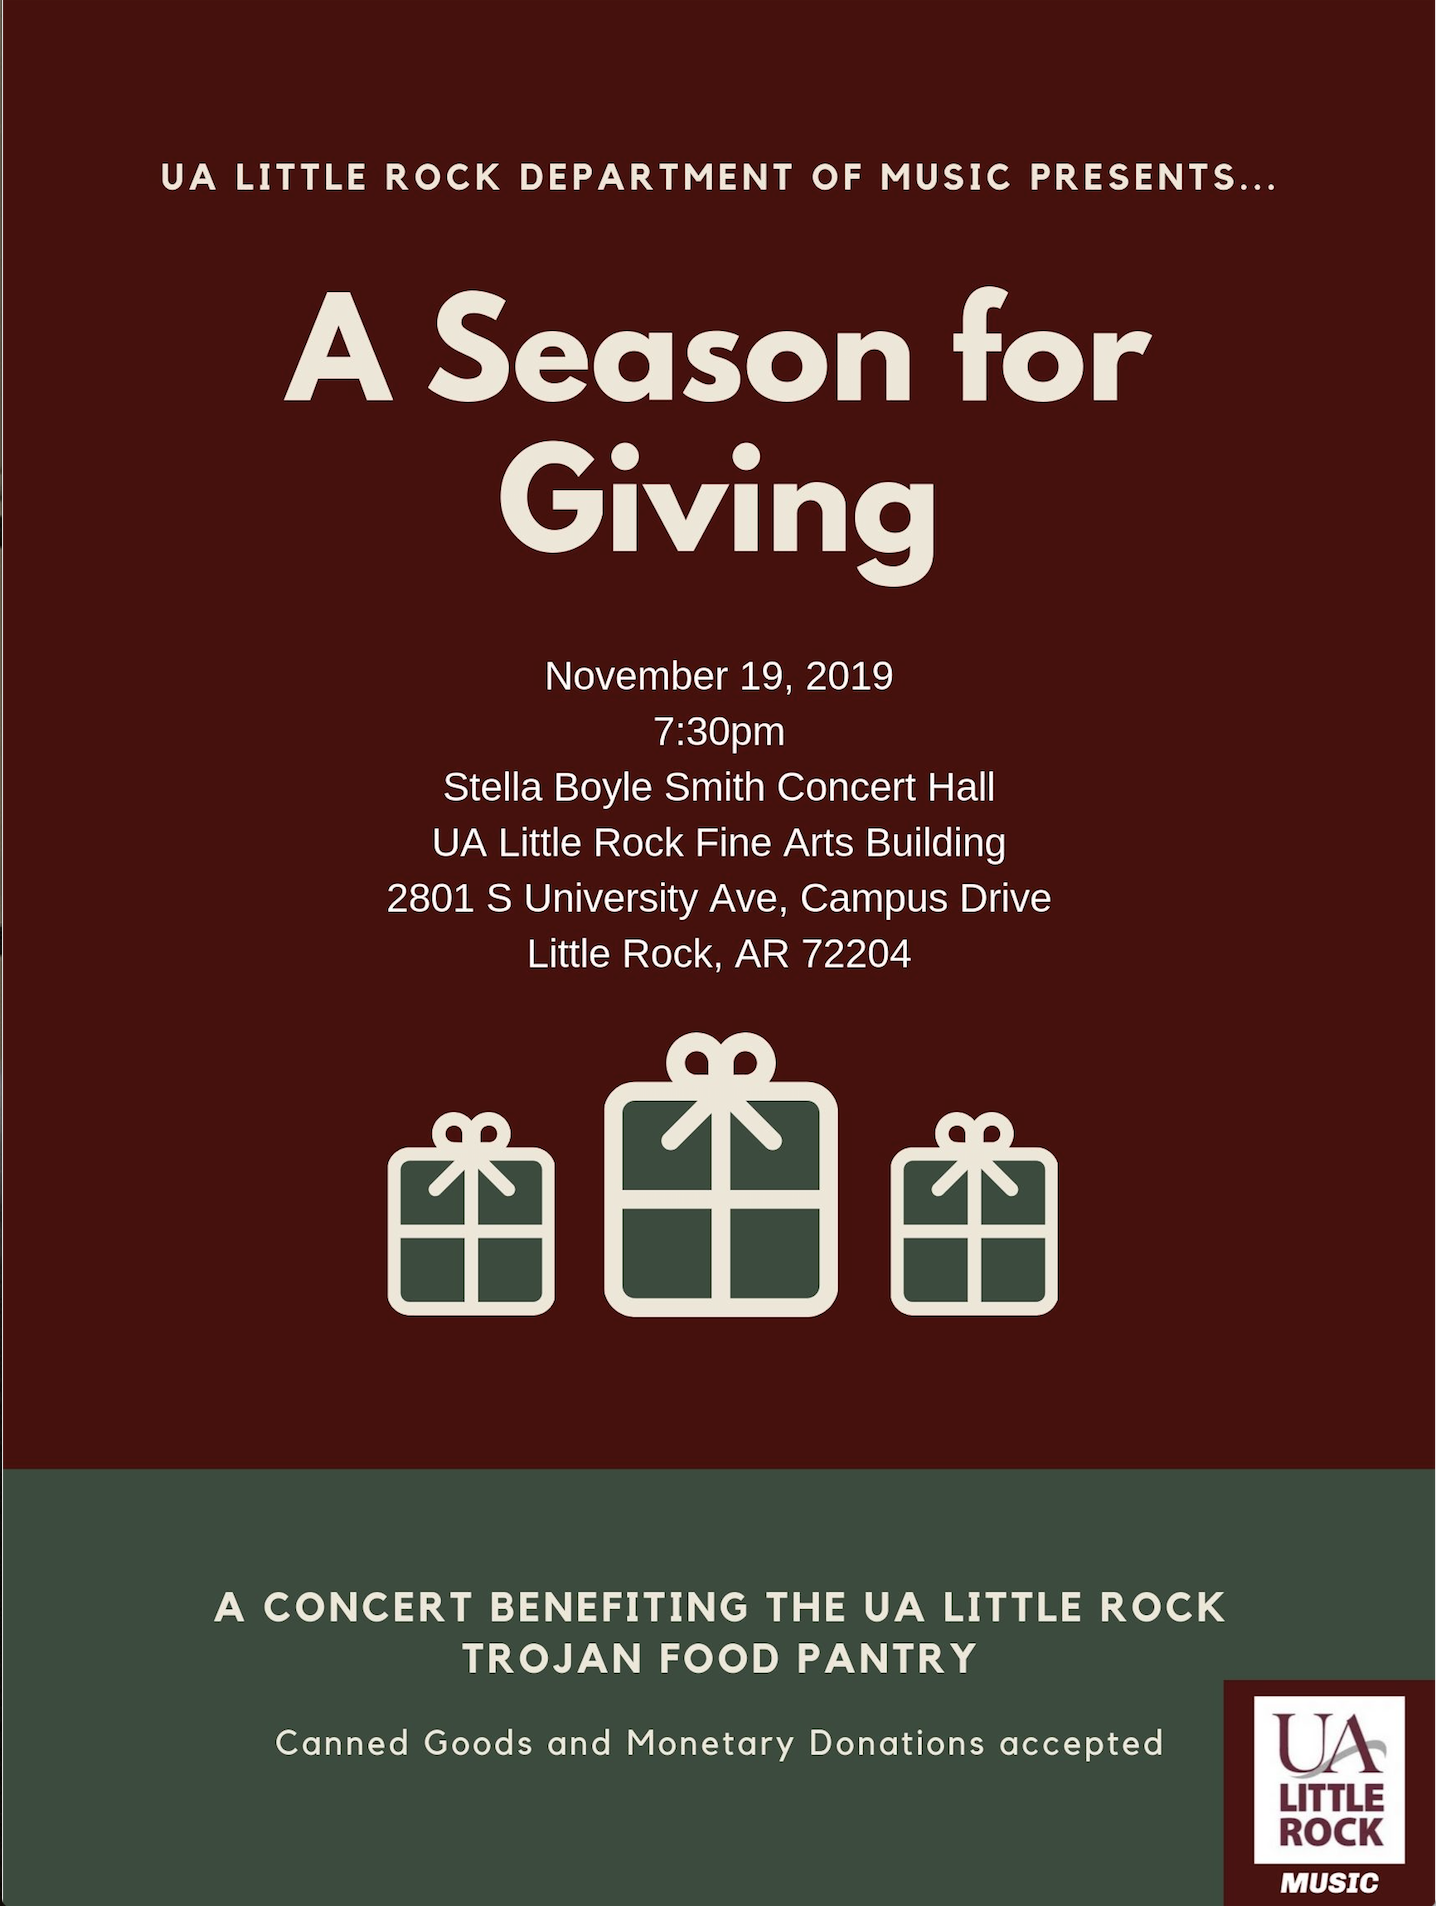 The University of Arkansas at Little Rock Department of Music will present a benefit concert for the Trojan Food Pantry at 7:30 p.m. Tuesday, Nov. 19, in the Stella Boyle Smith Concert Hall in the Fine Arts Building. Canned goods and monetary donations will be accepted. The free event is open to the public.